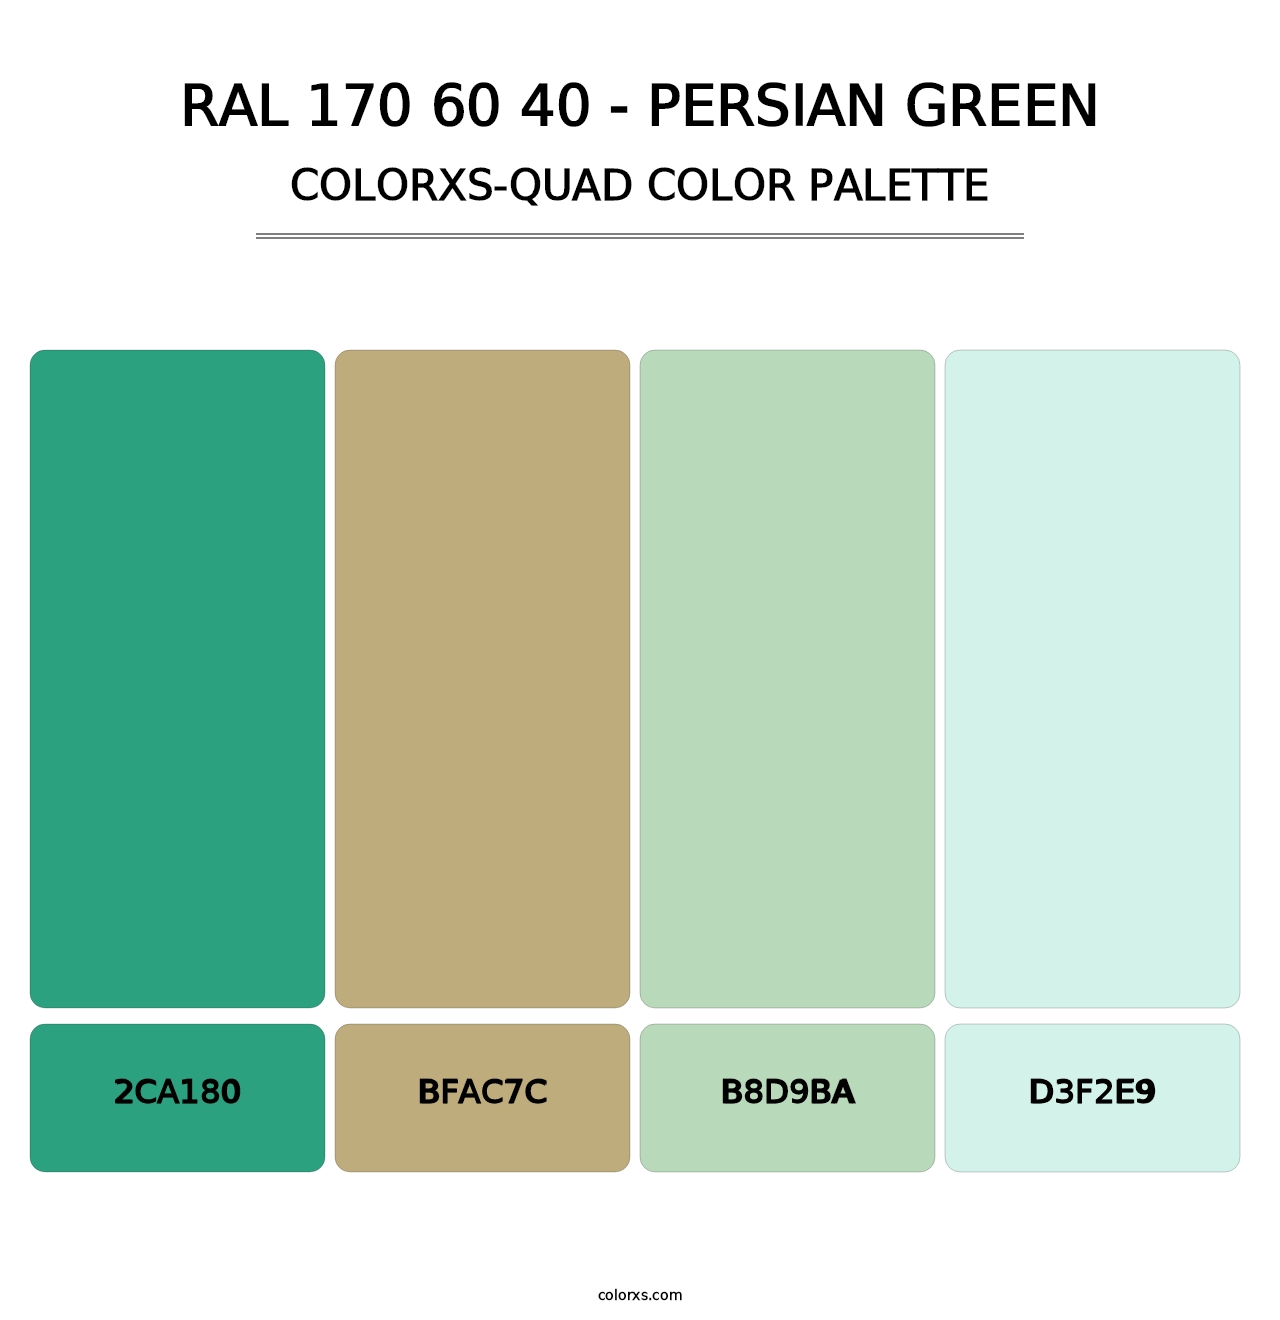 RAL 170 60 40 - Persian Green - Colorxs Quad Palette